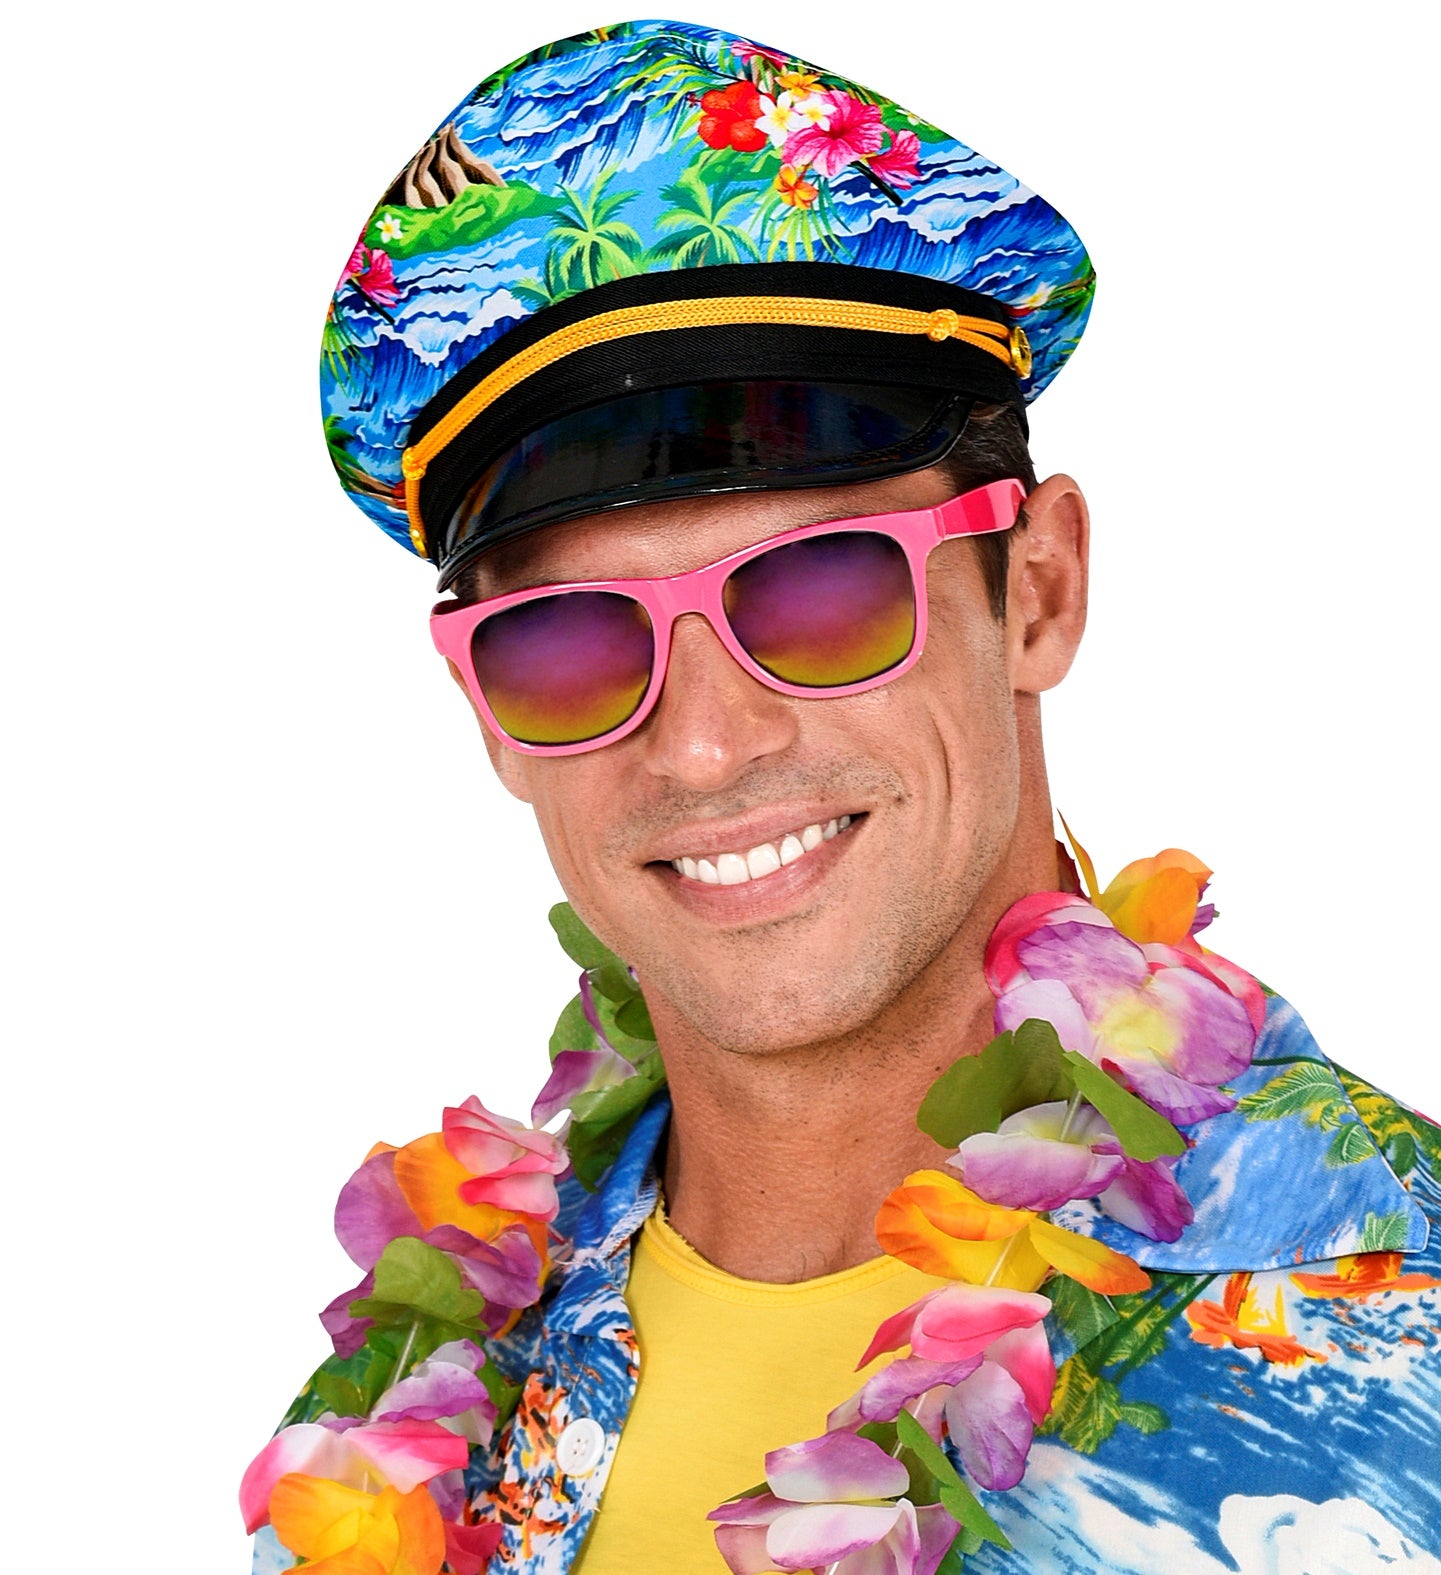 Hawaii Captain's Hat for festival or beach party